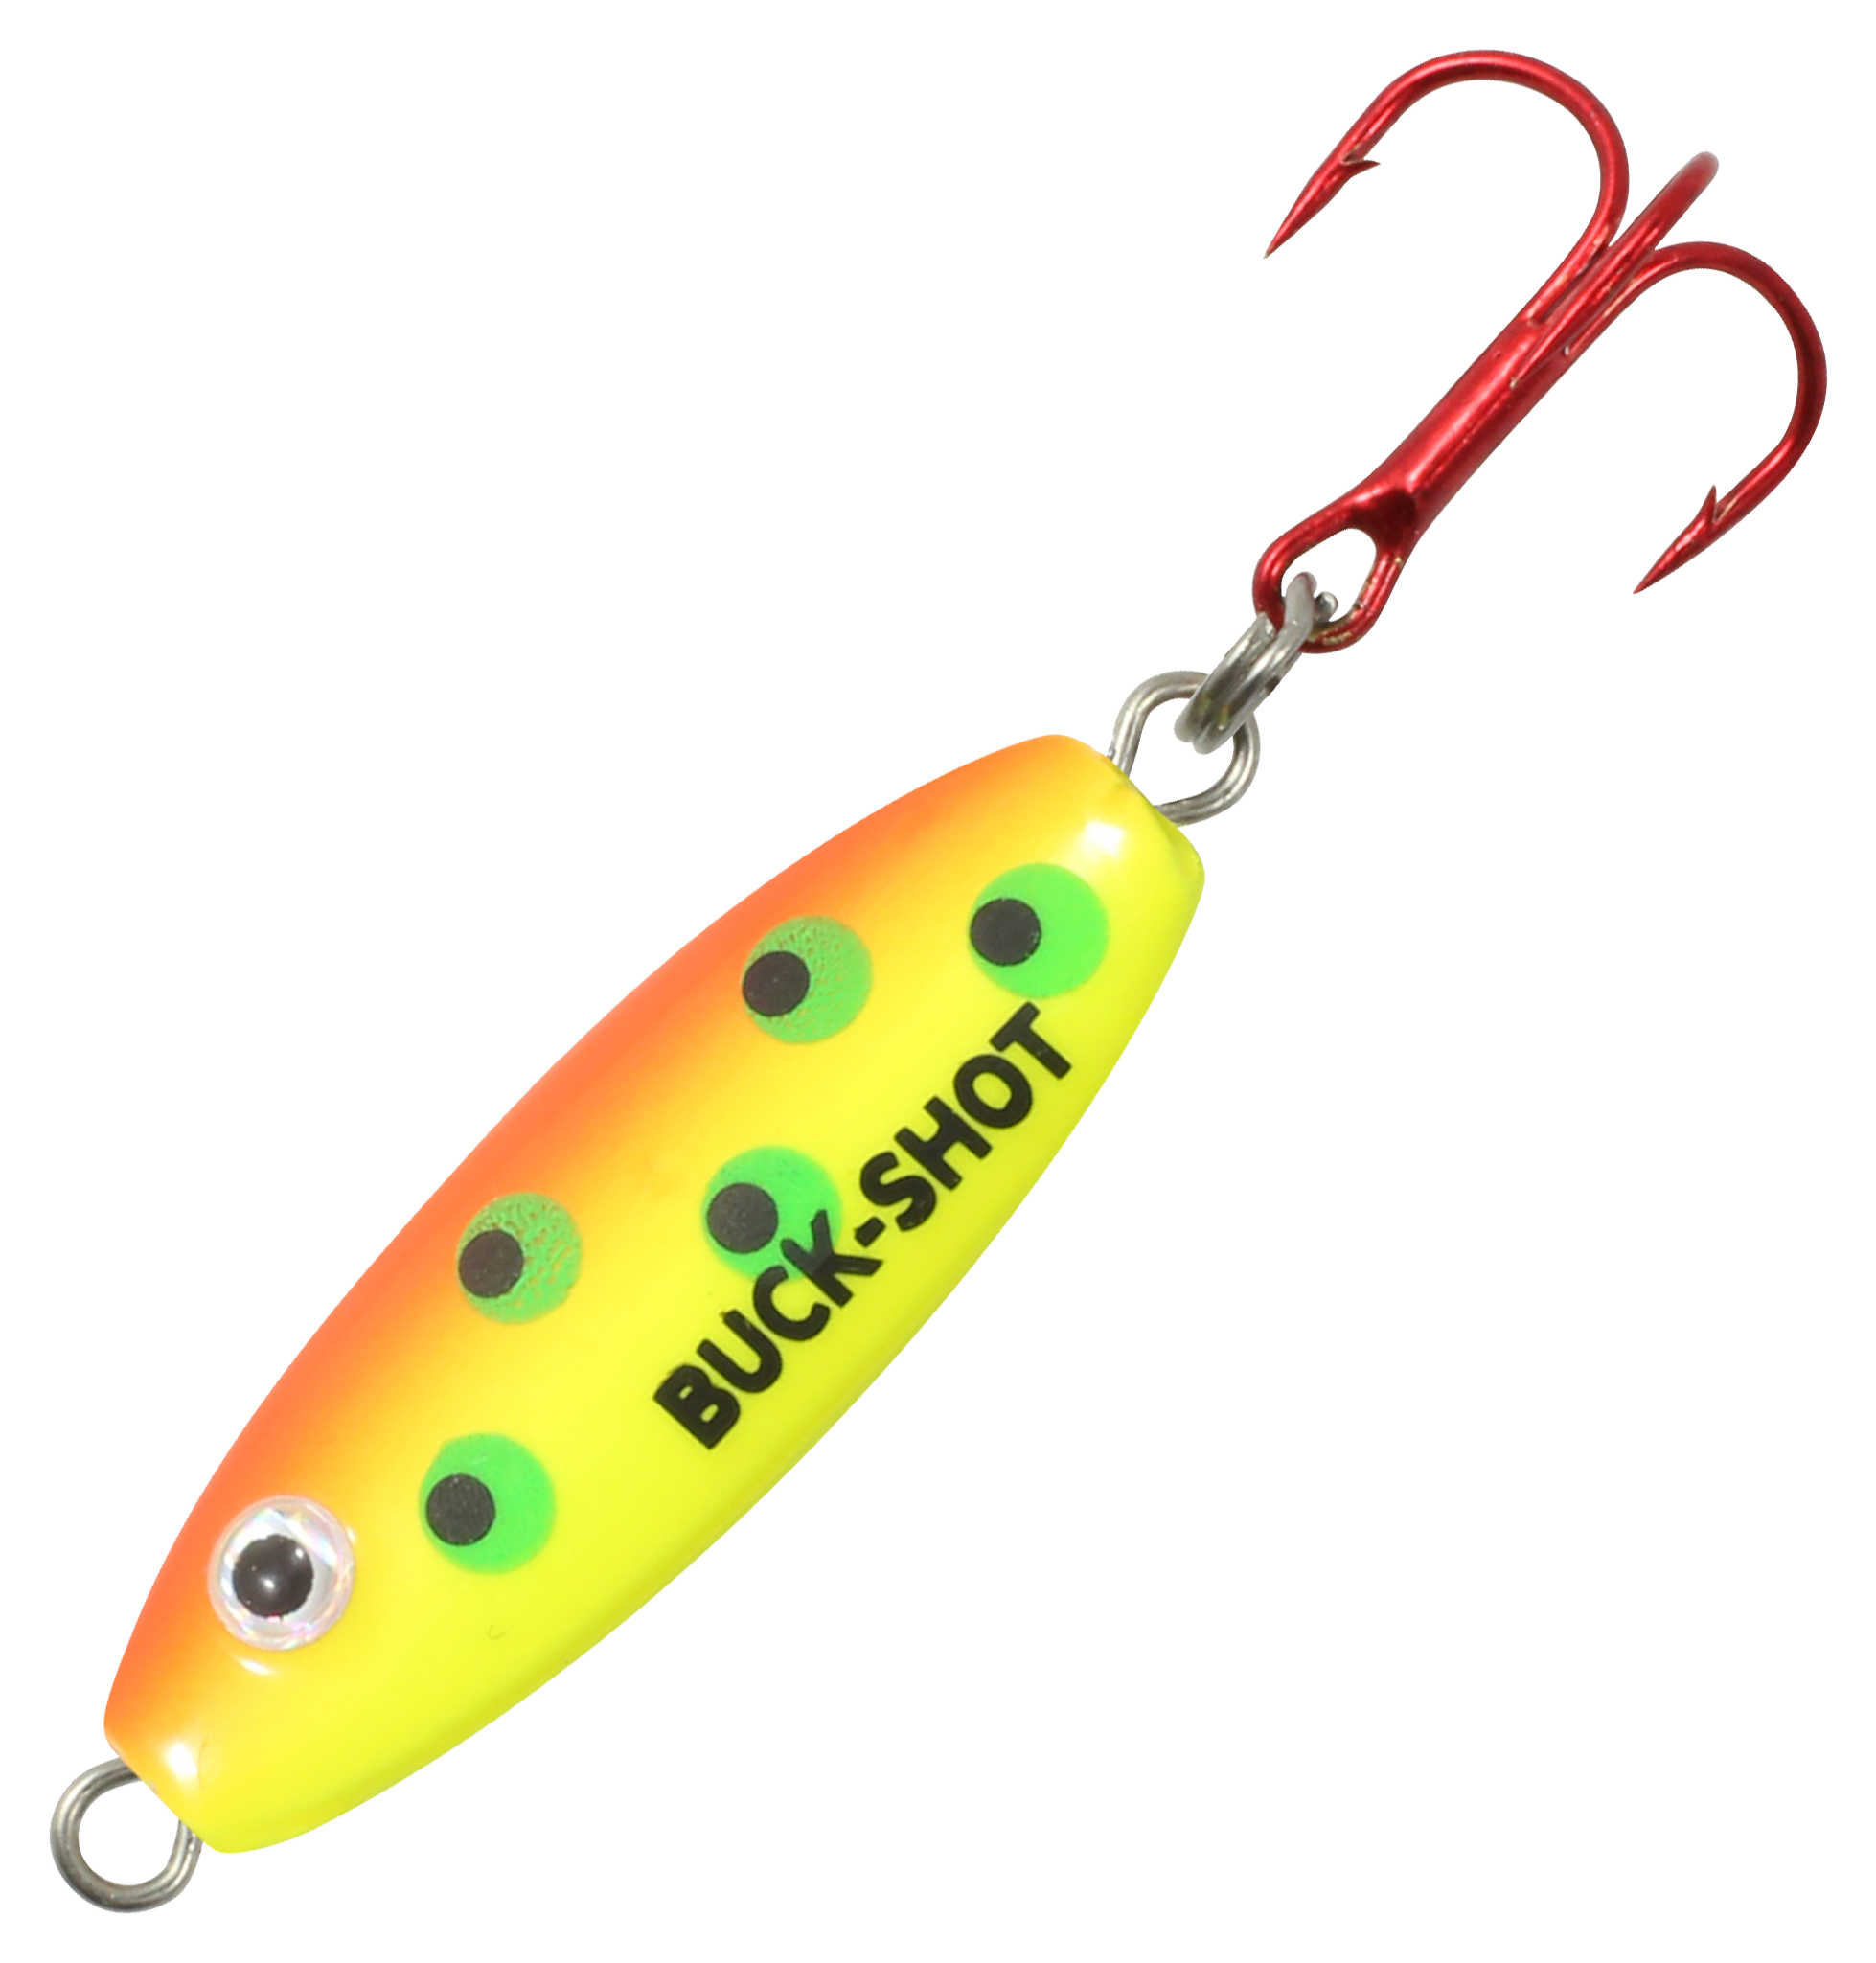  Northland Fishing Tackle Buck-Shot Ice Fishing Rattle Spoon,  Assorted Colors, 1/8 Oz, 3/Cd : Sports & Outdoors